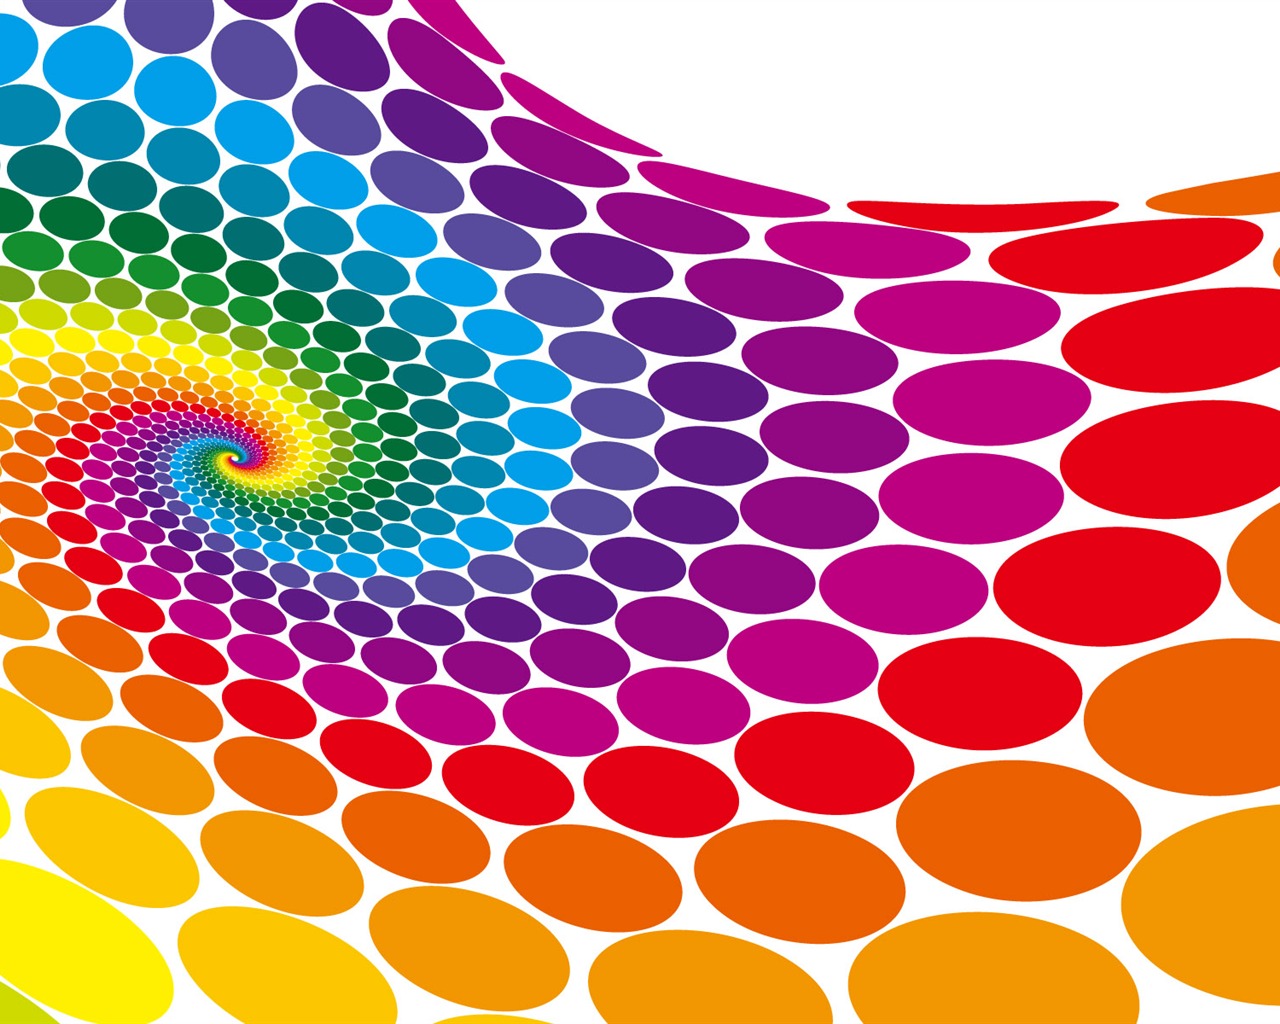 Colorful vector background wallpaper (3) #1 - 1280x1024